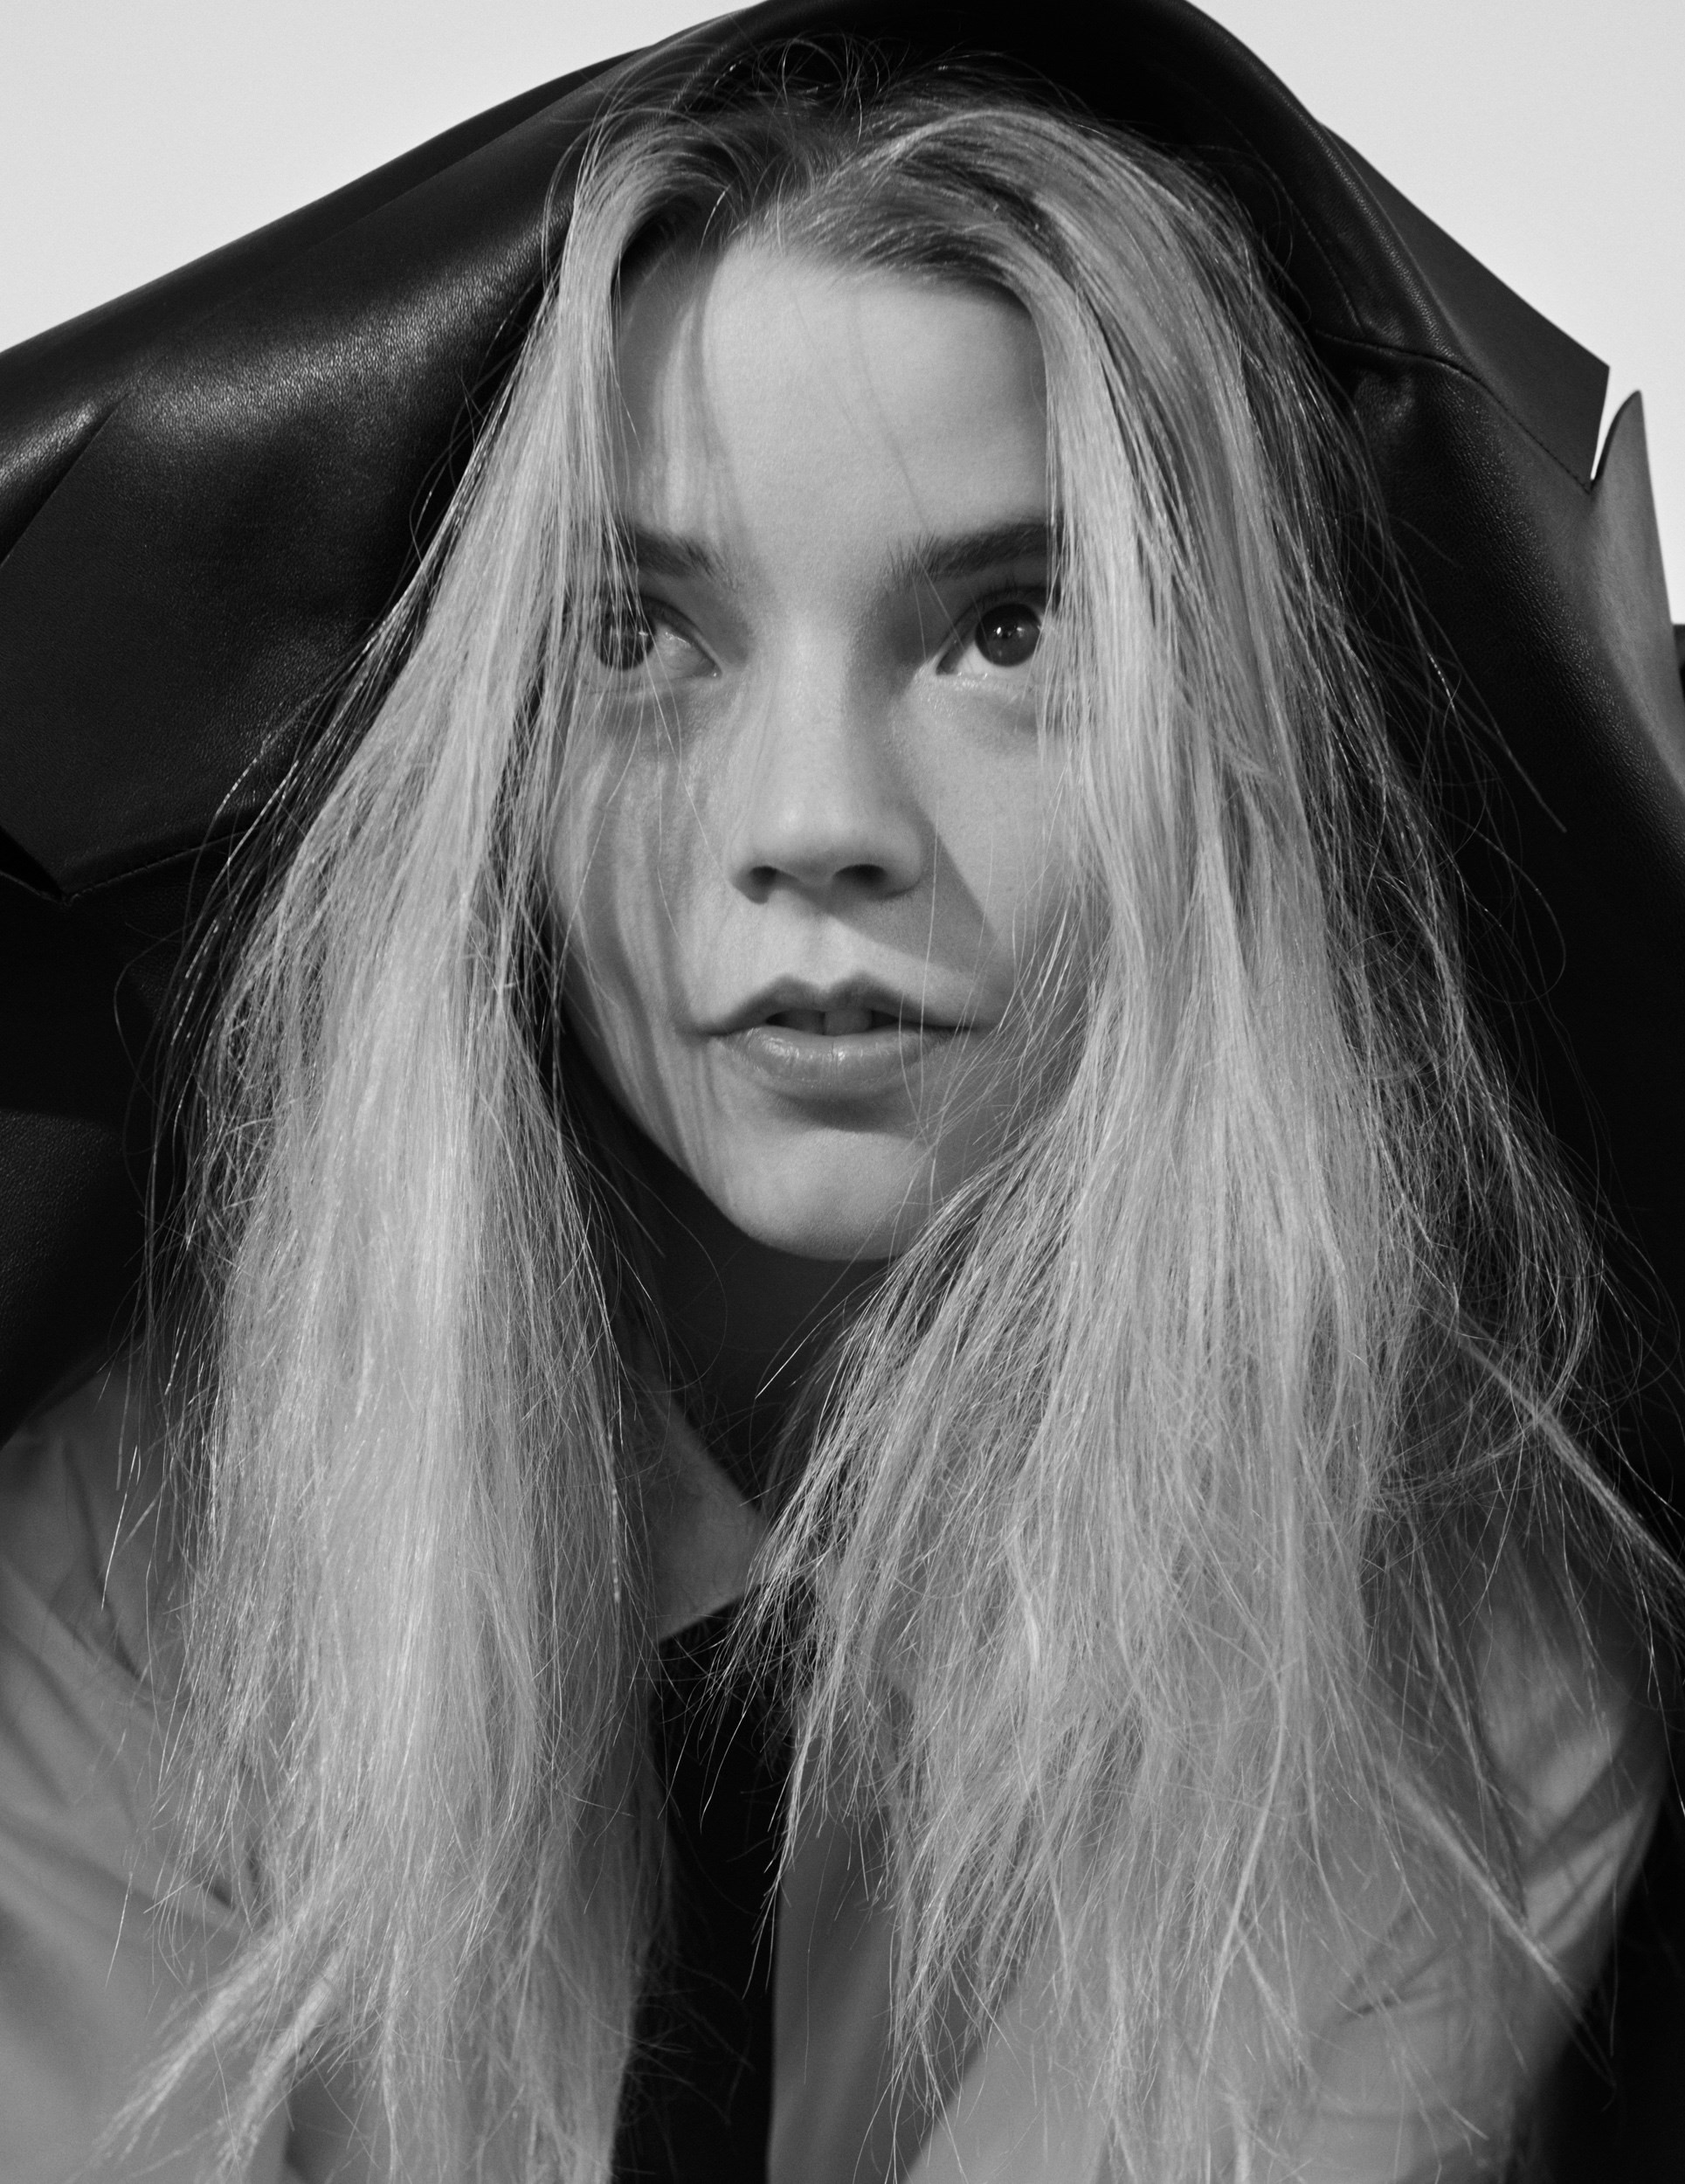 How Anya Taylor-Joy Learned to Soothe Herself - The New York Times